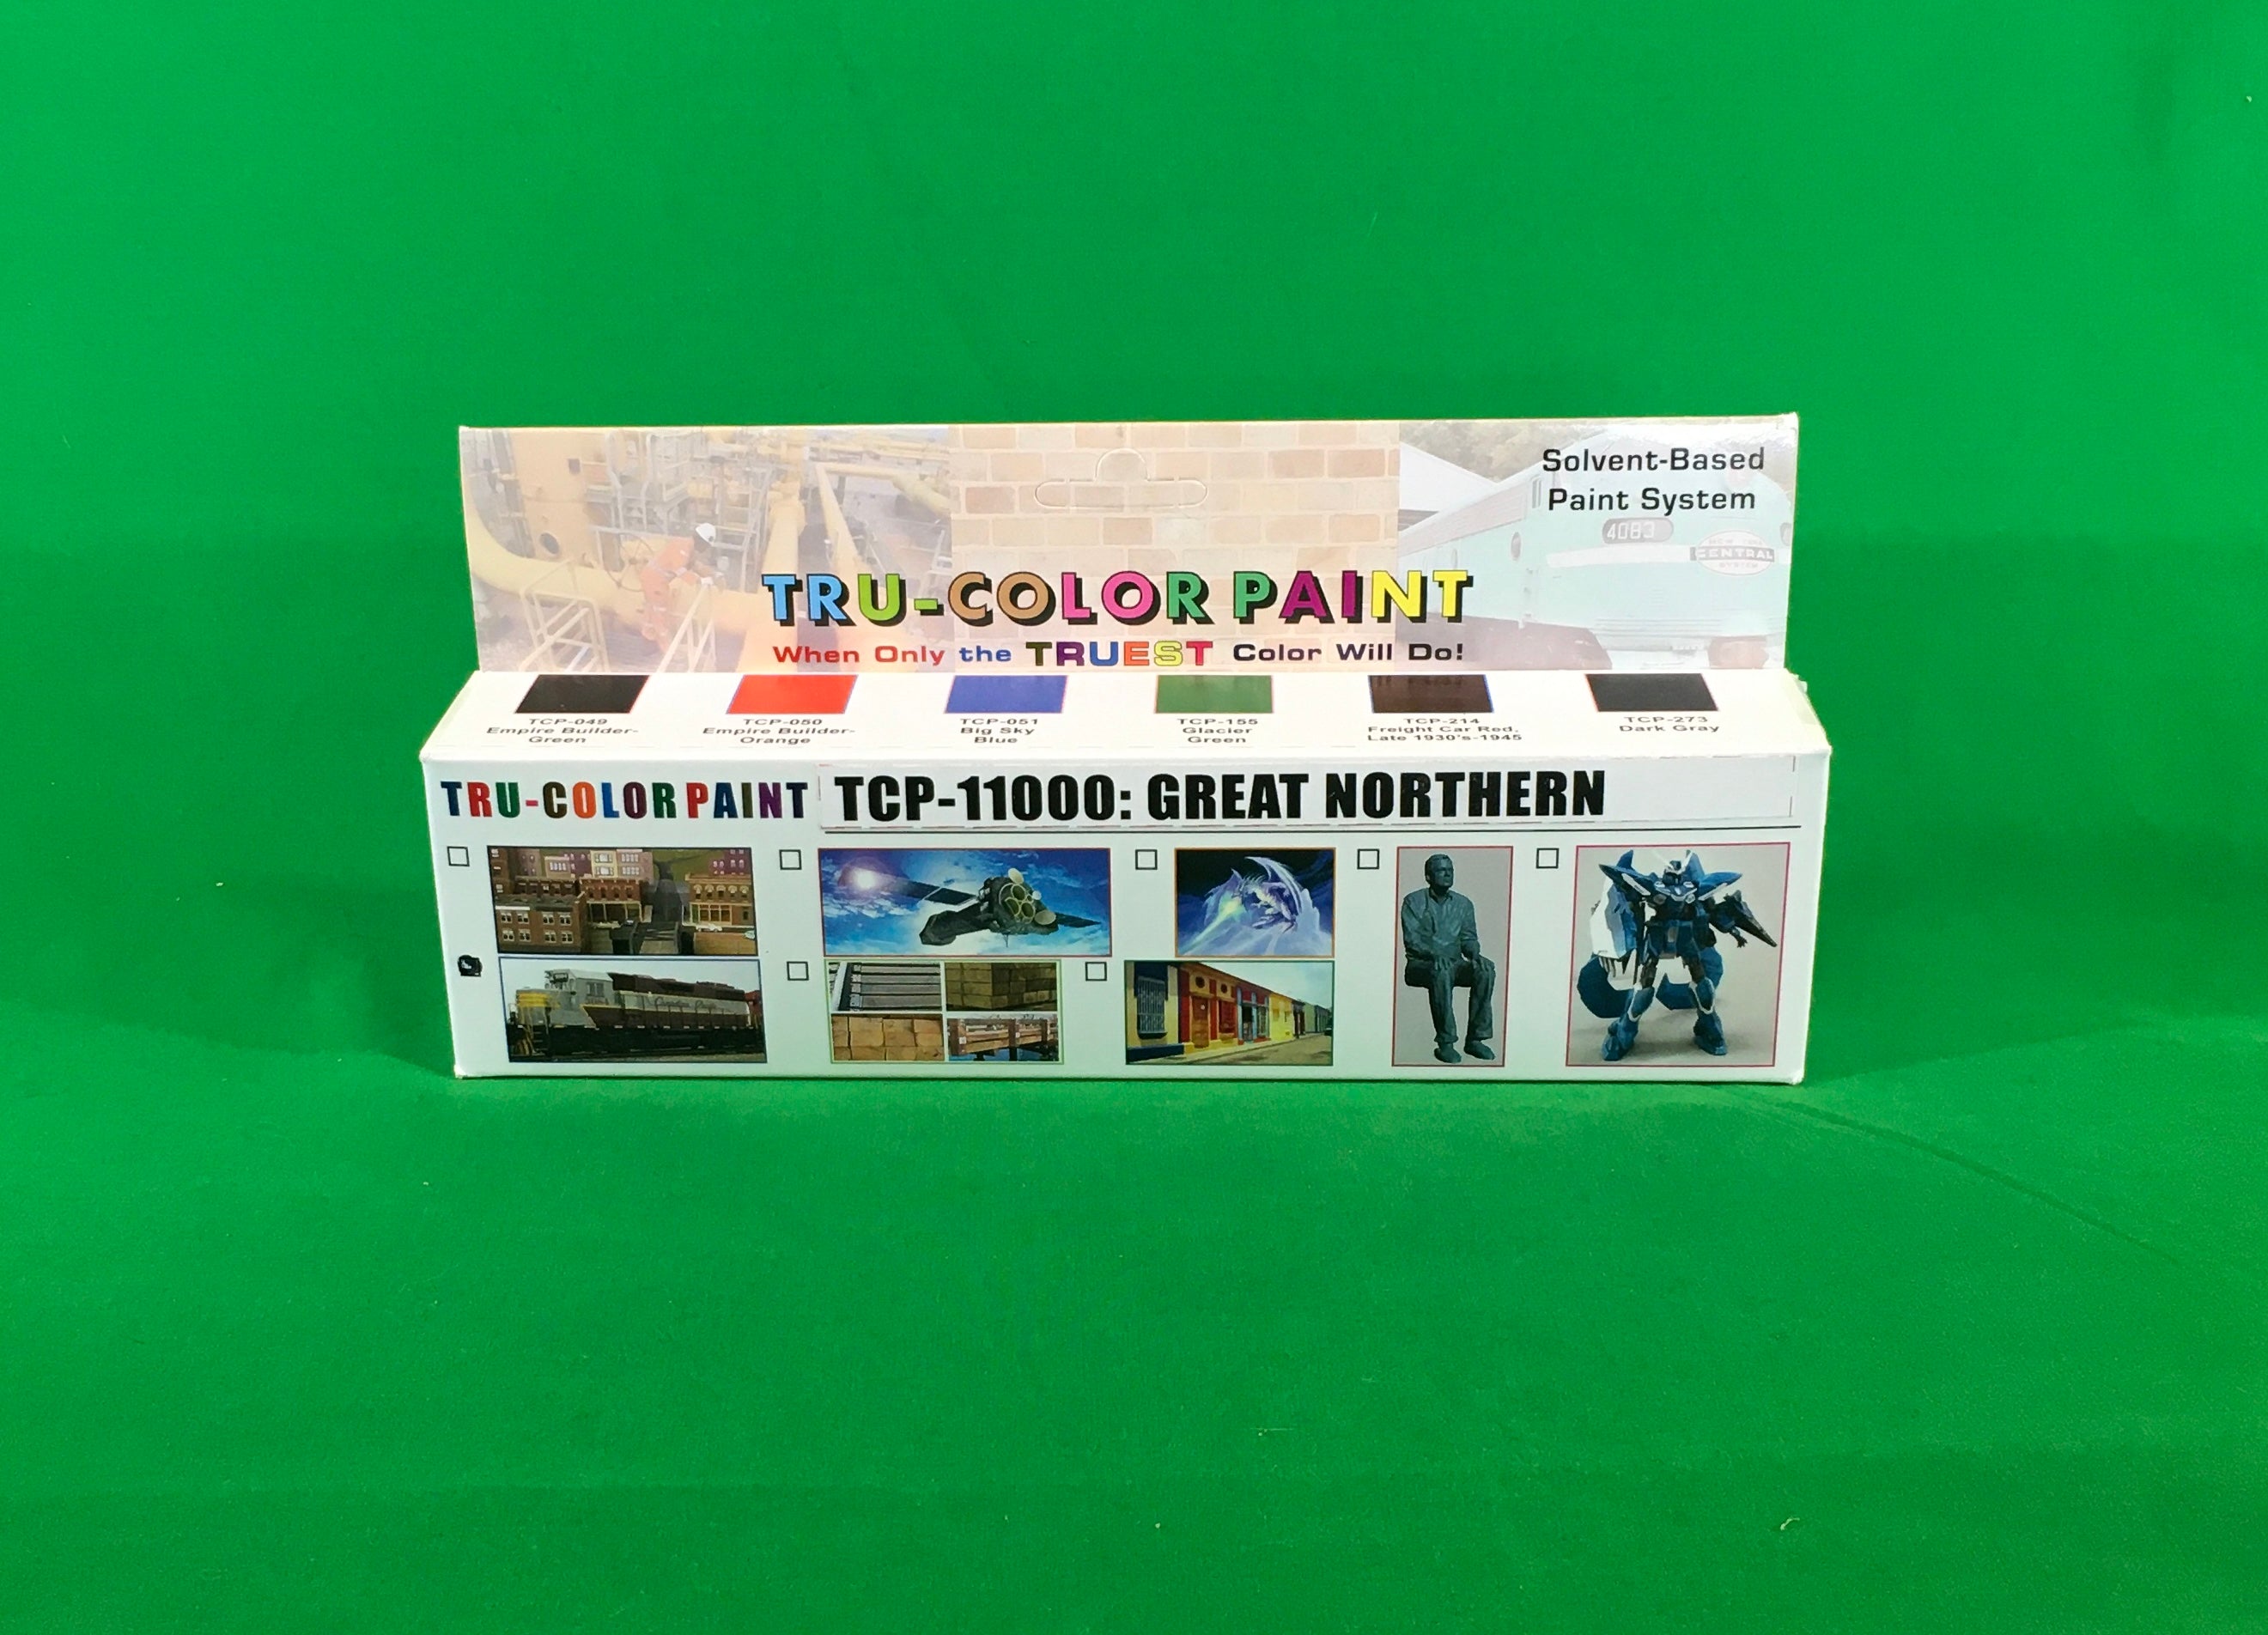 Tru-Color Paint - TCP-11000 - Great Northern Set (Solvent-Based Paint)